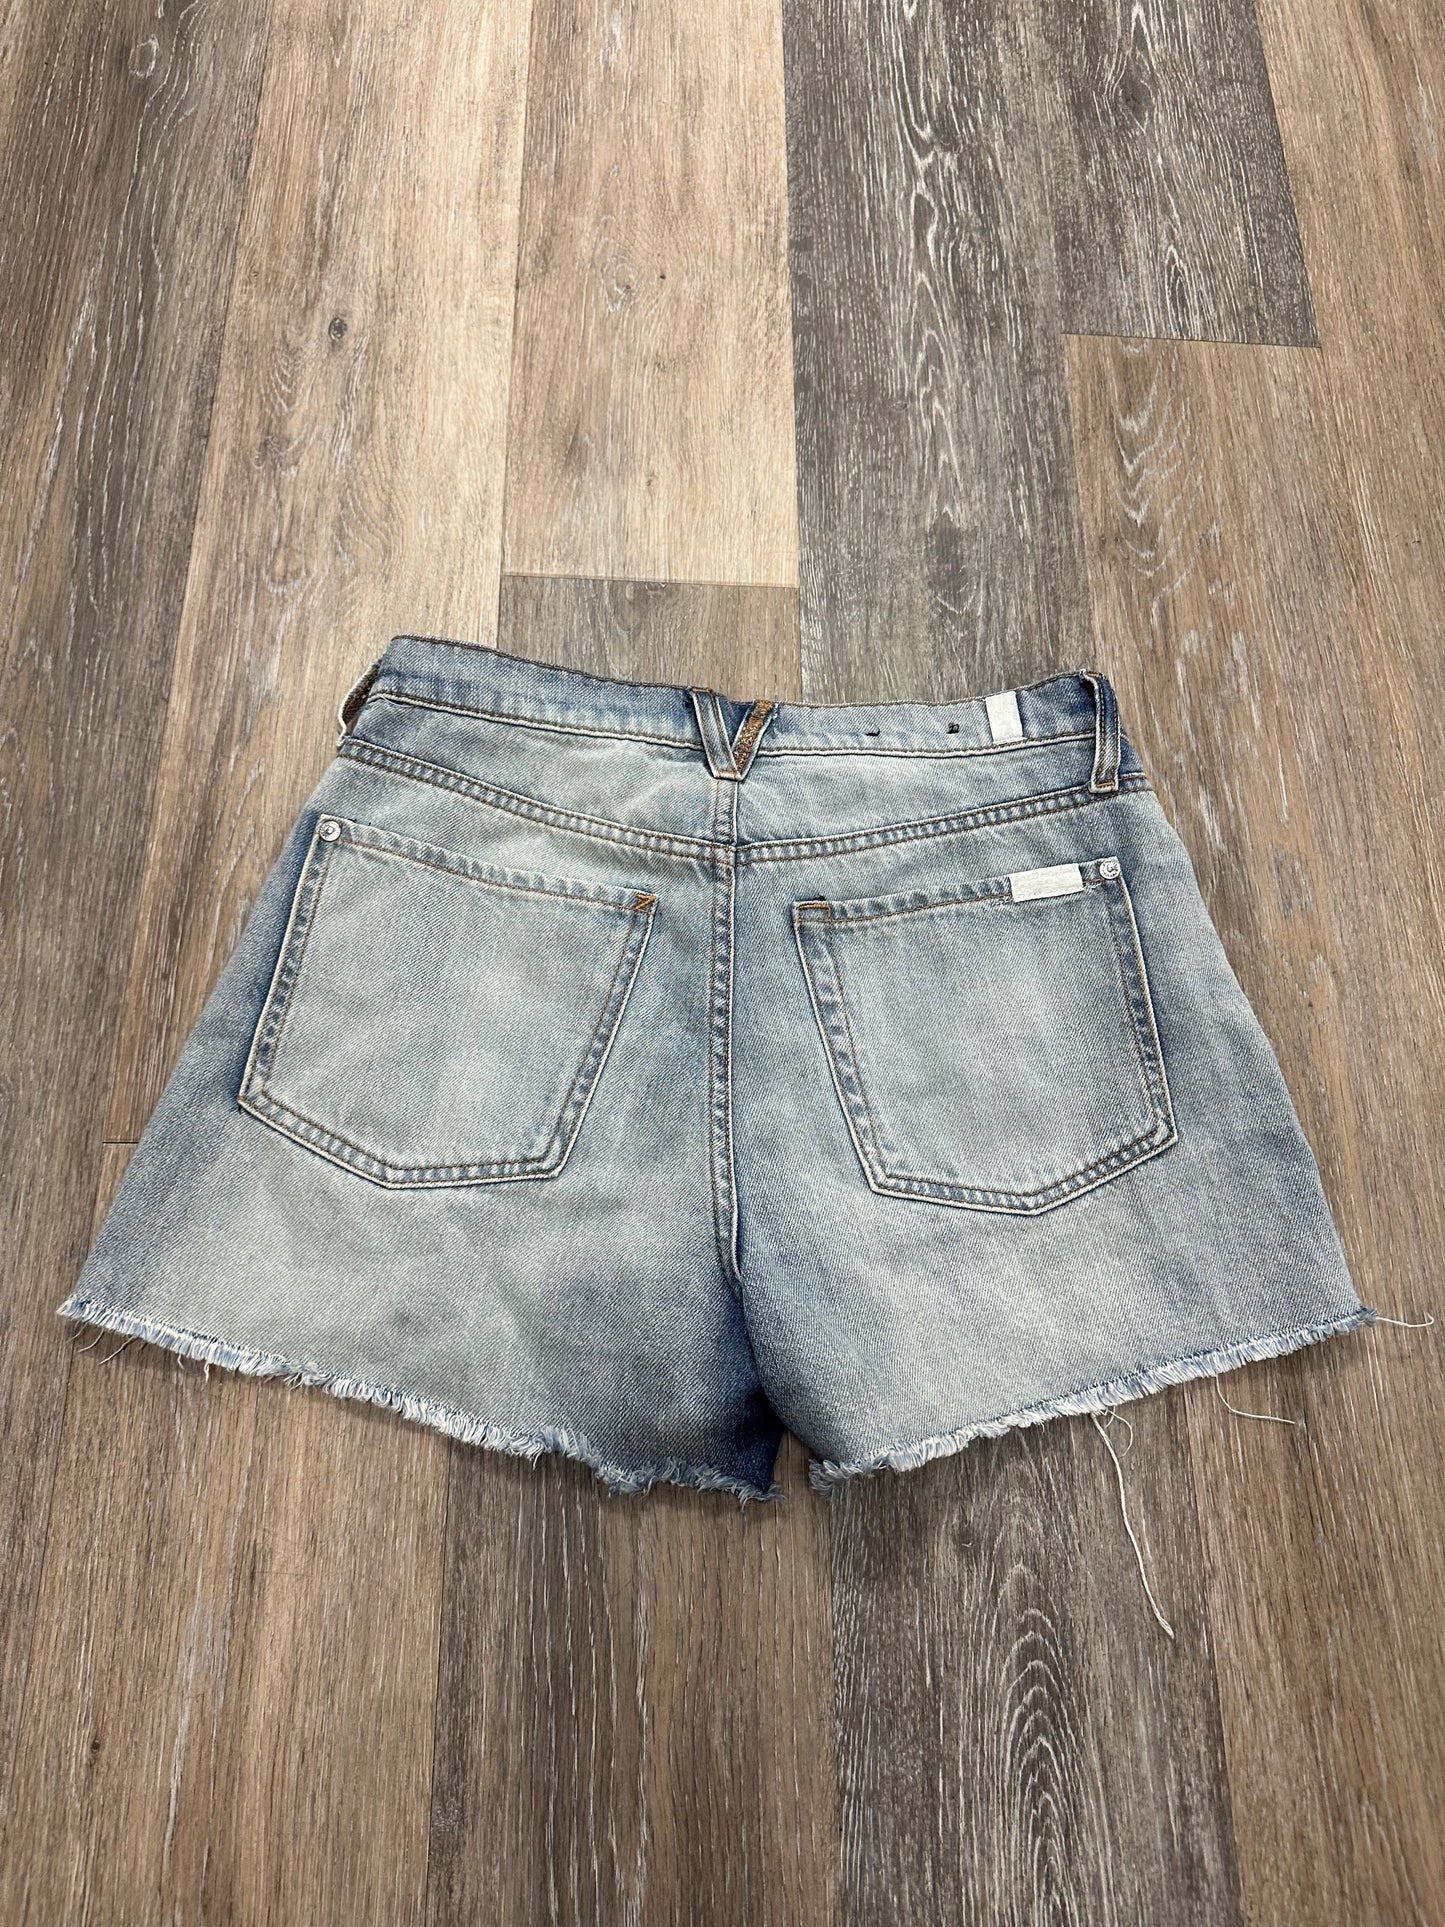 Shorts Designer By Seven For All Mankind  Size: 2/26